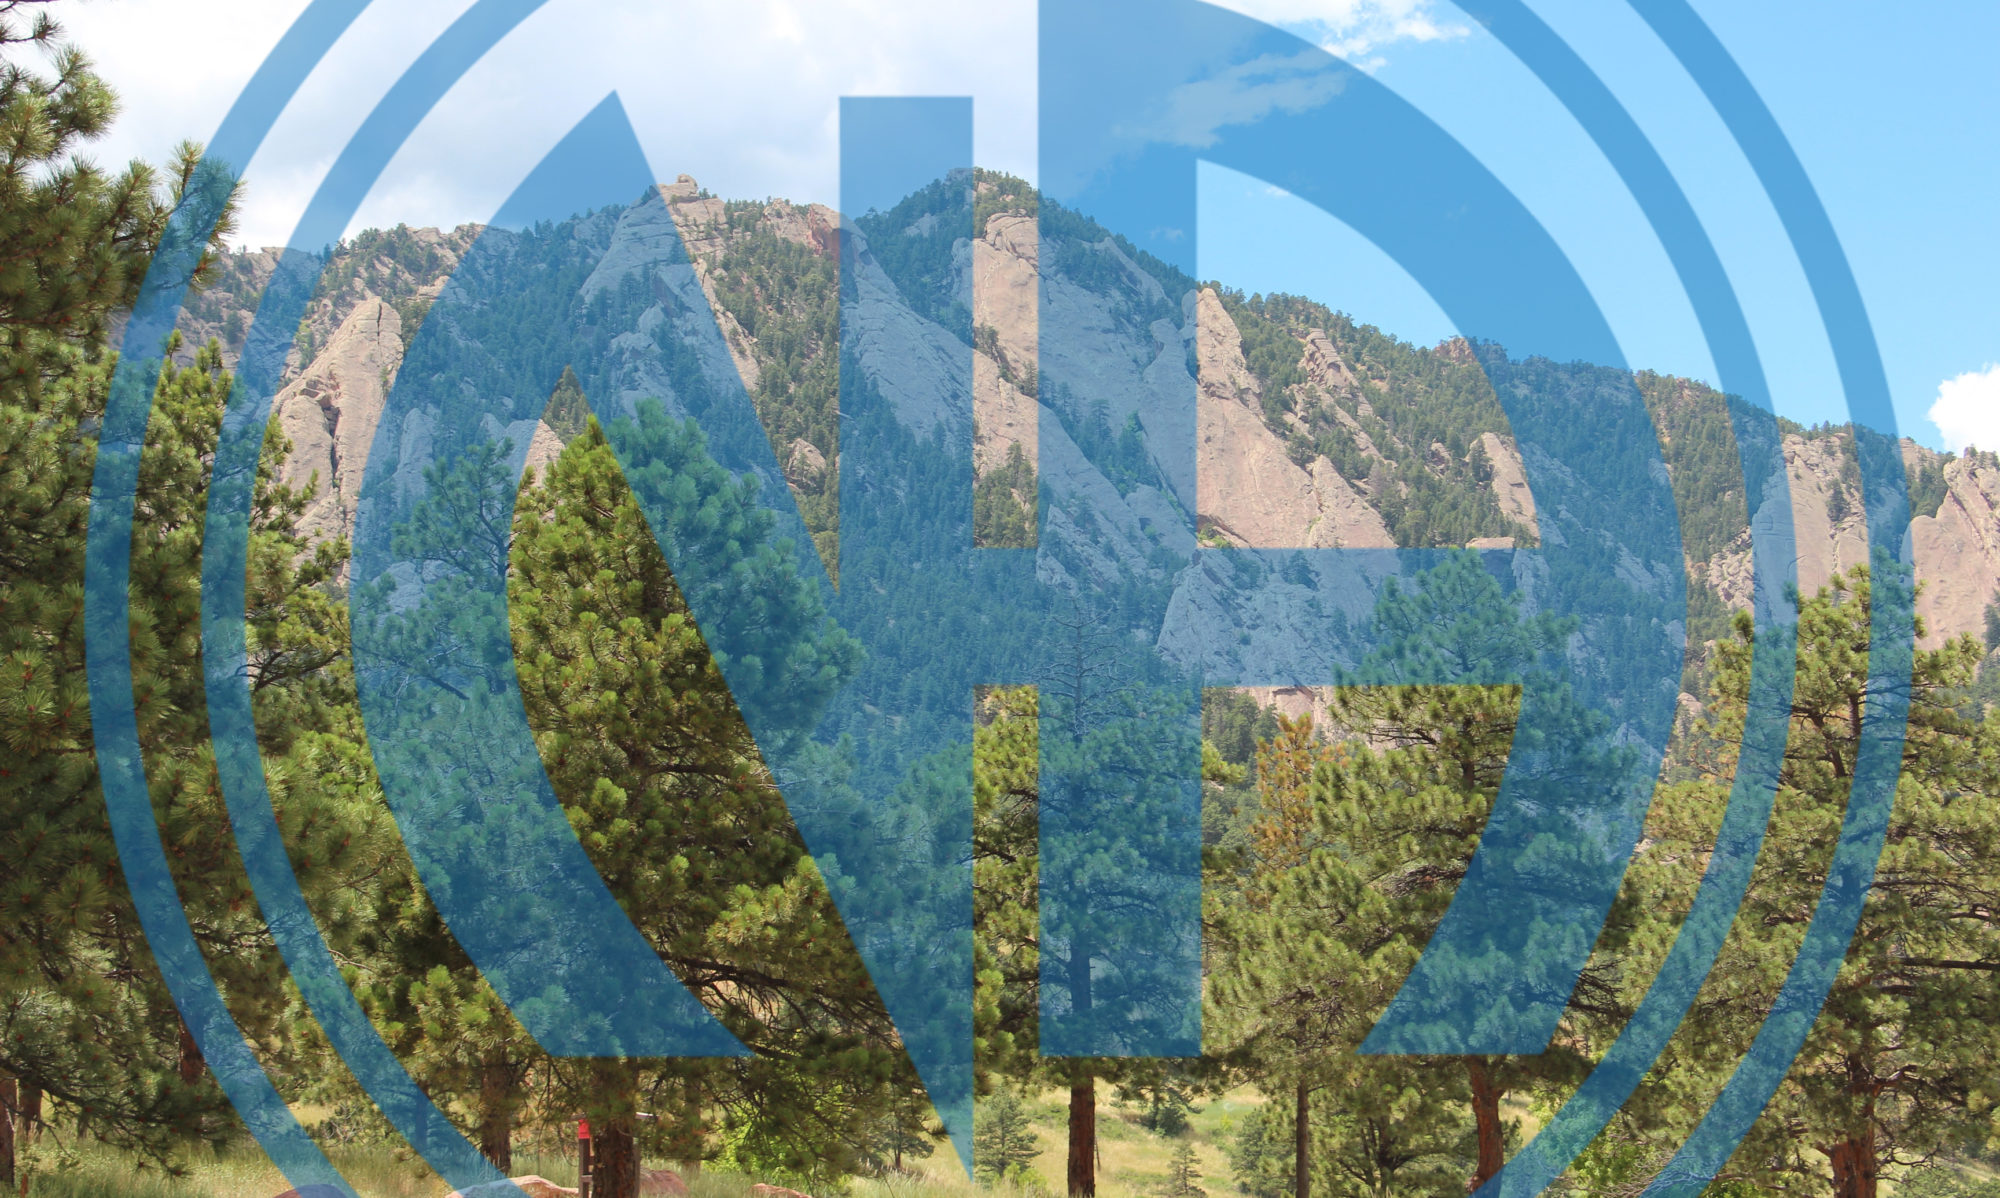 Boulder Area of Narcotics Anonymous